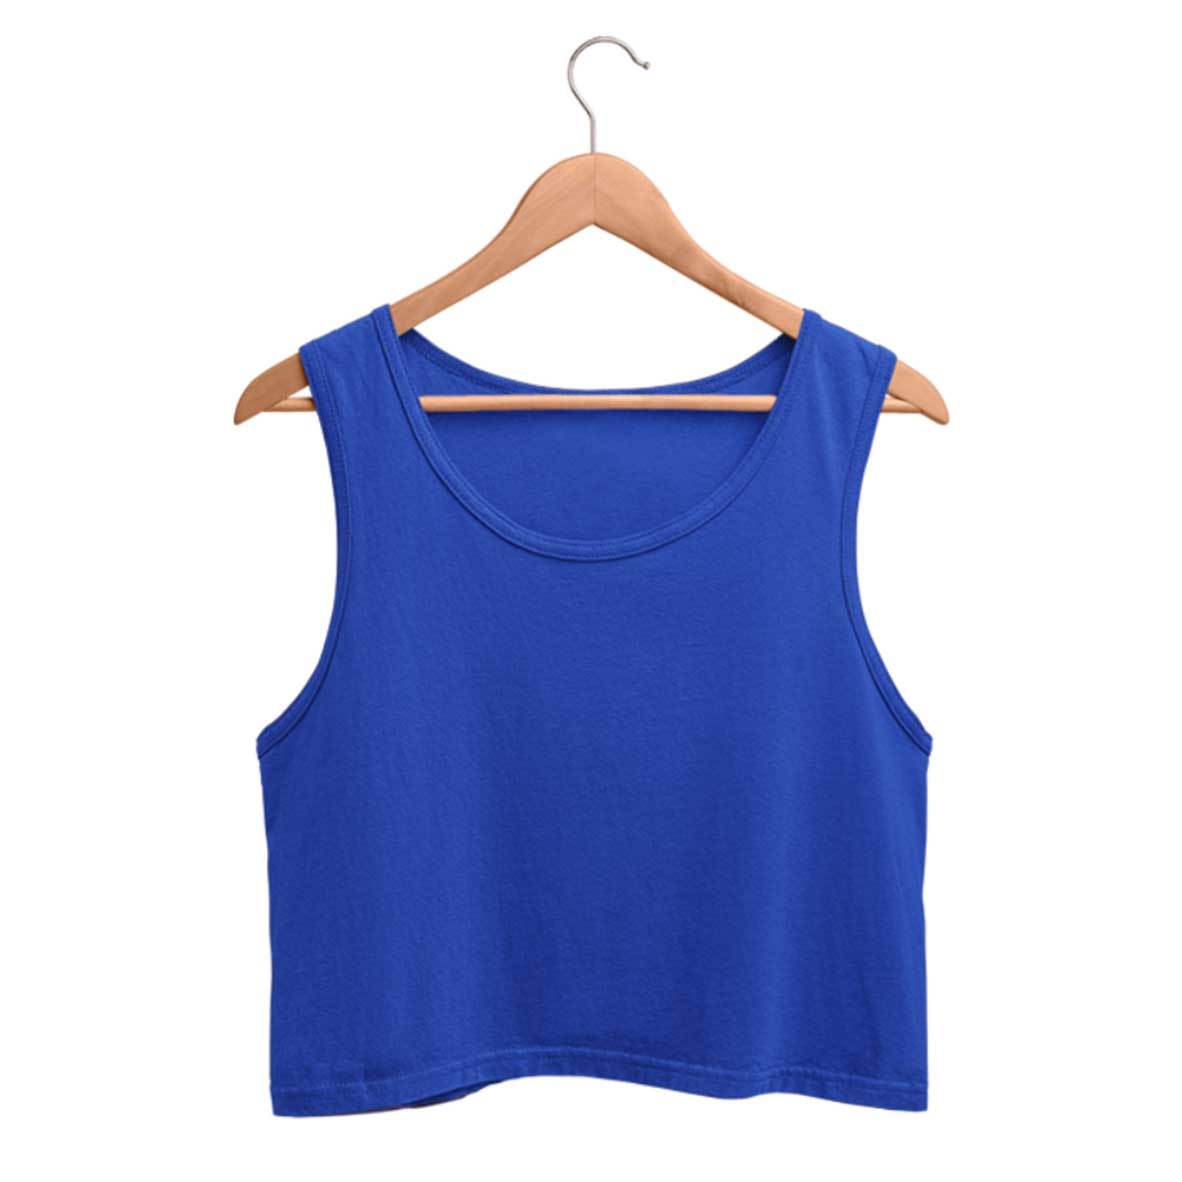 crop tank tops royal blue crop tank top the banyan tee tbt basics  for girls for women for gym